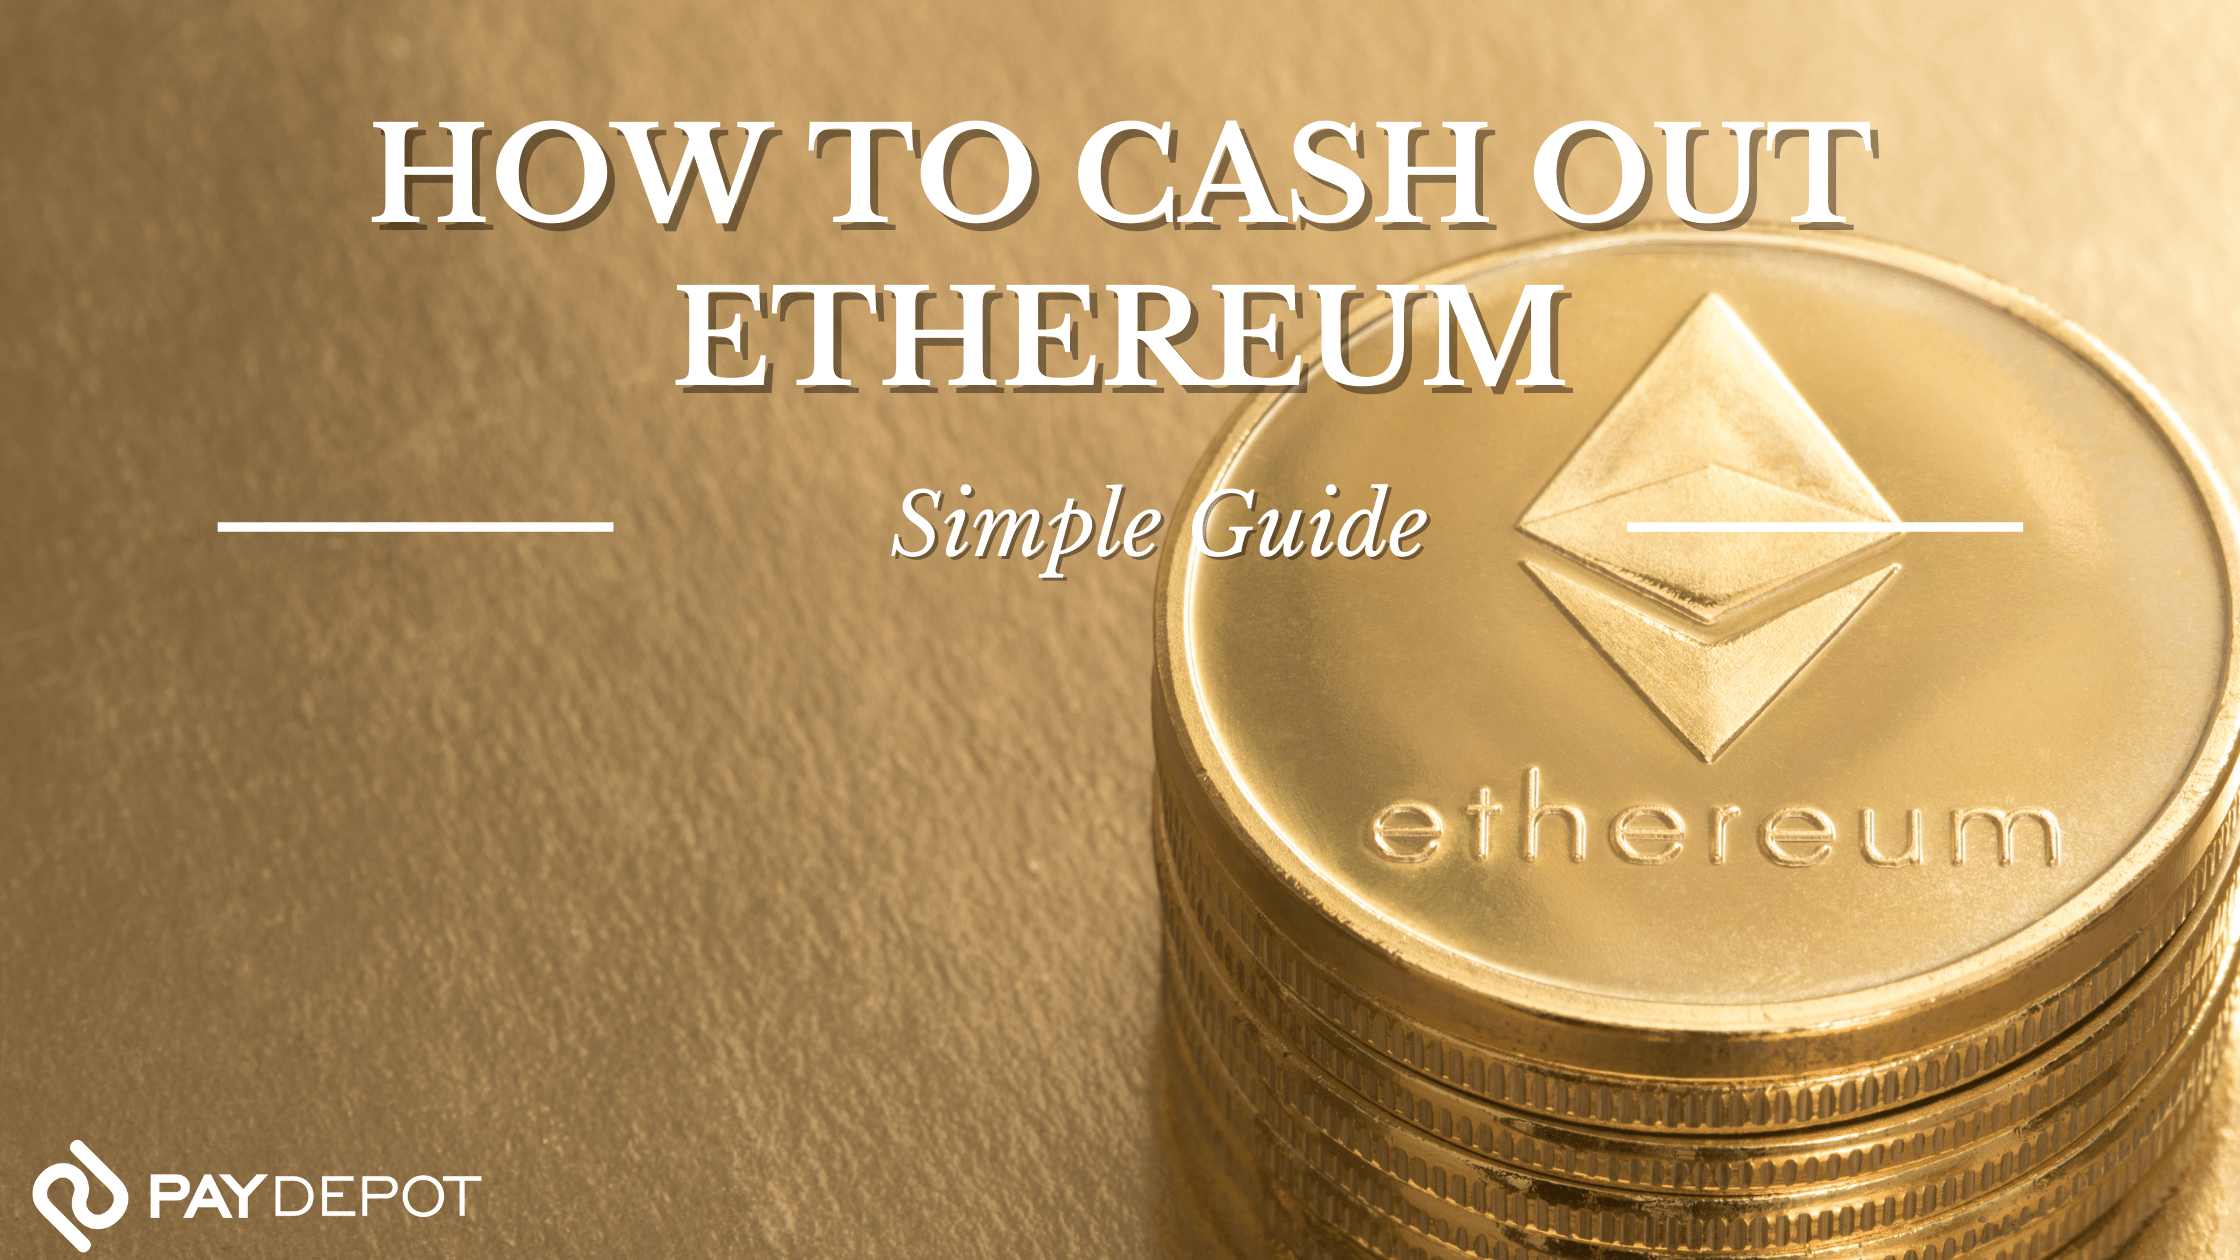 How to Cash Out Ethereum